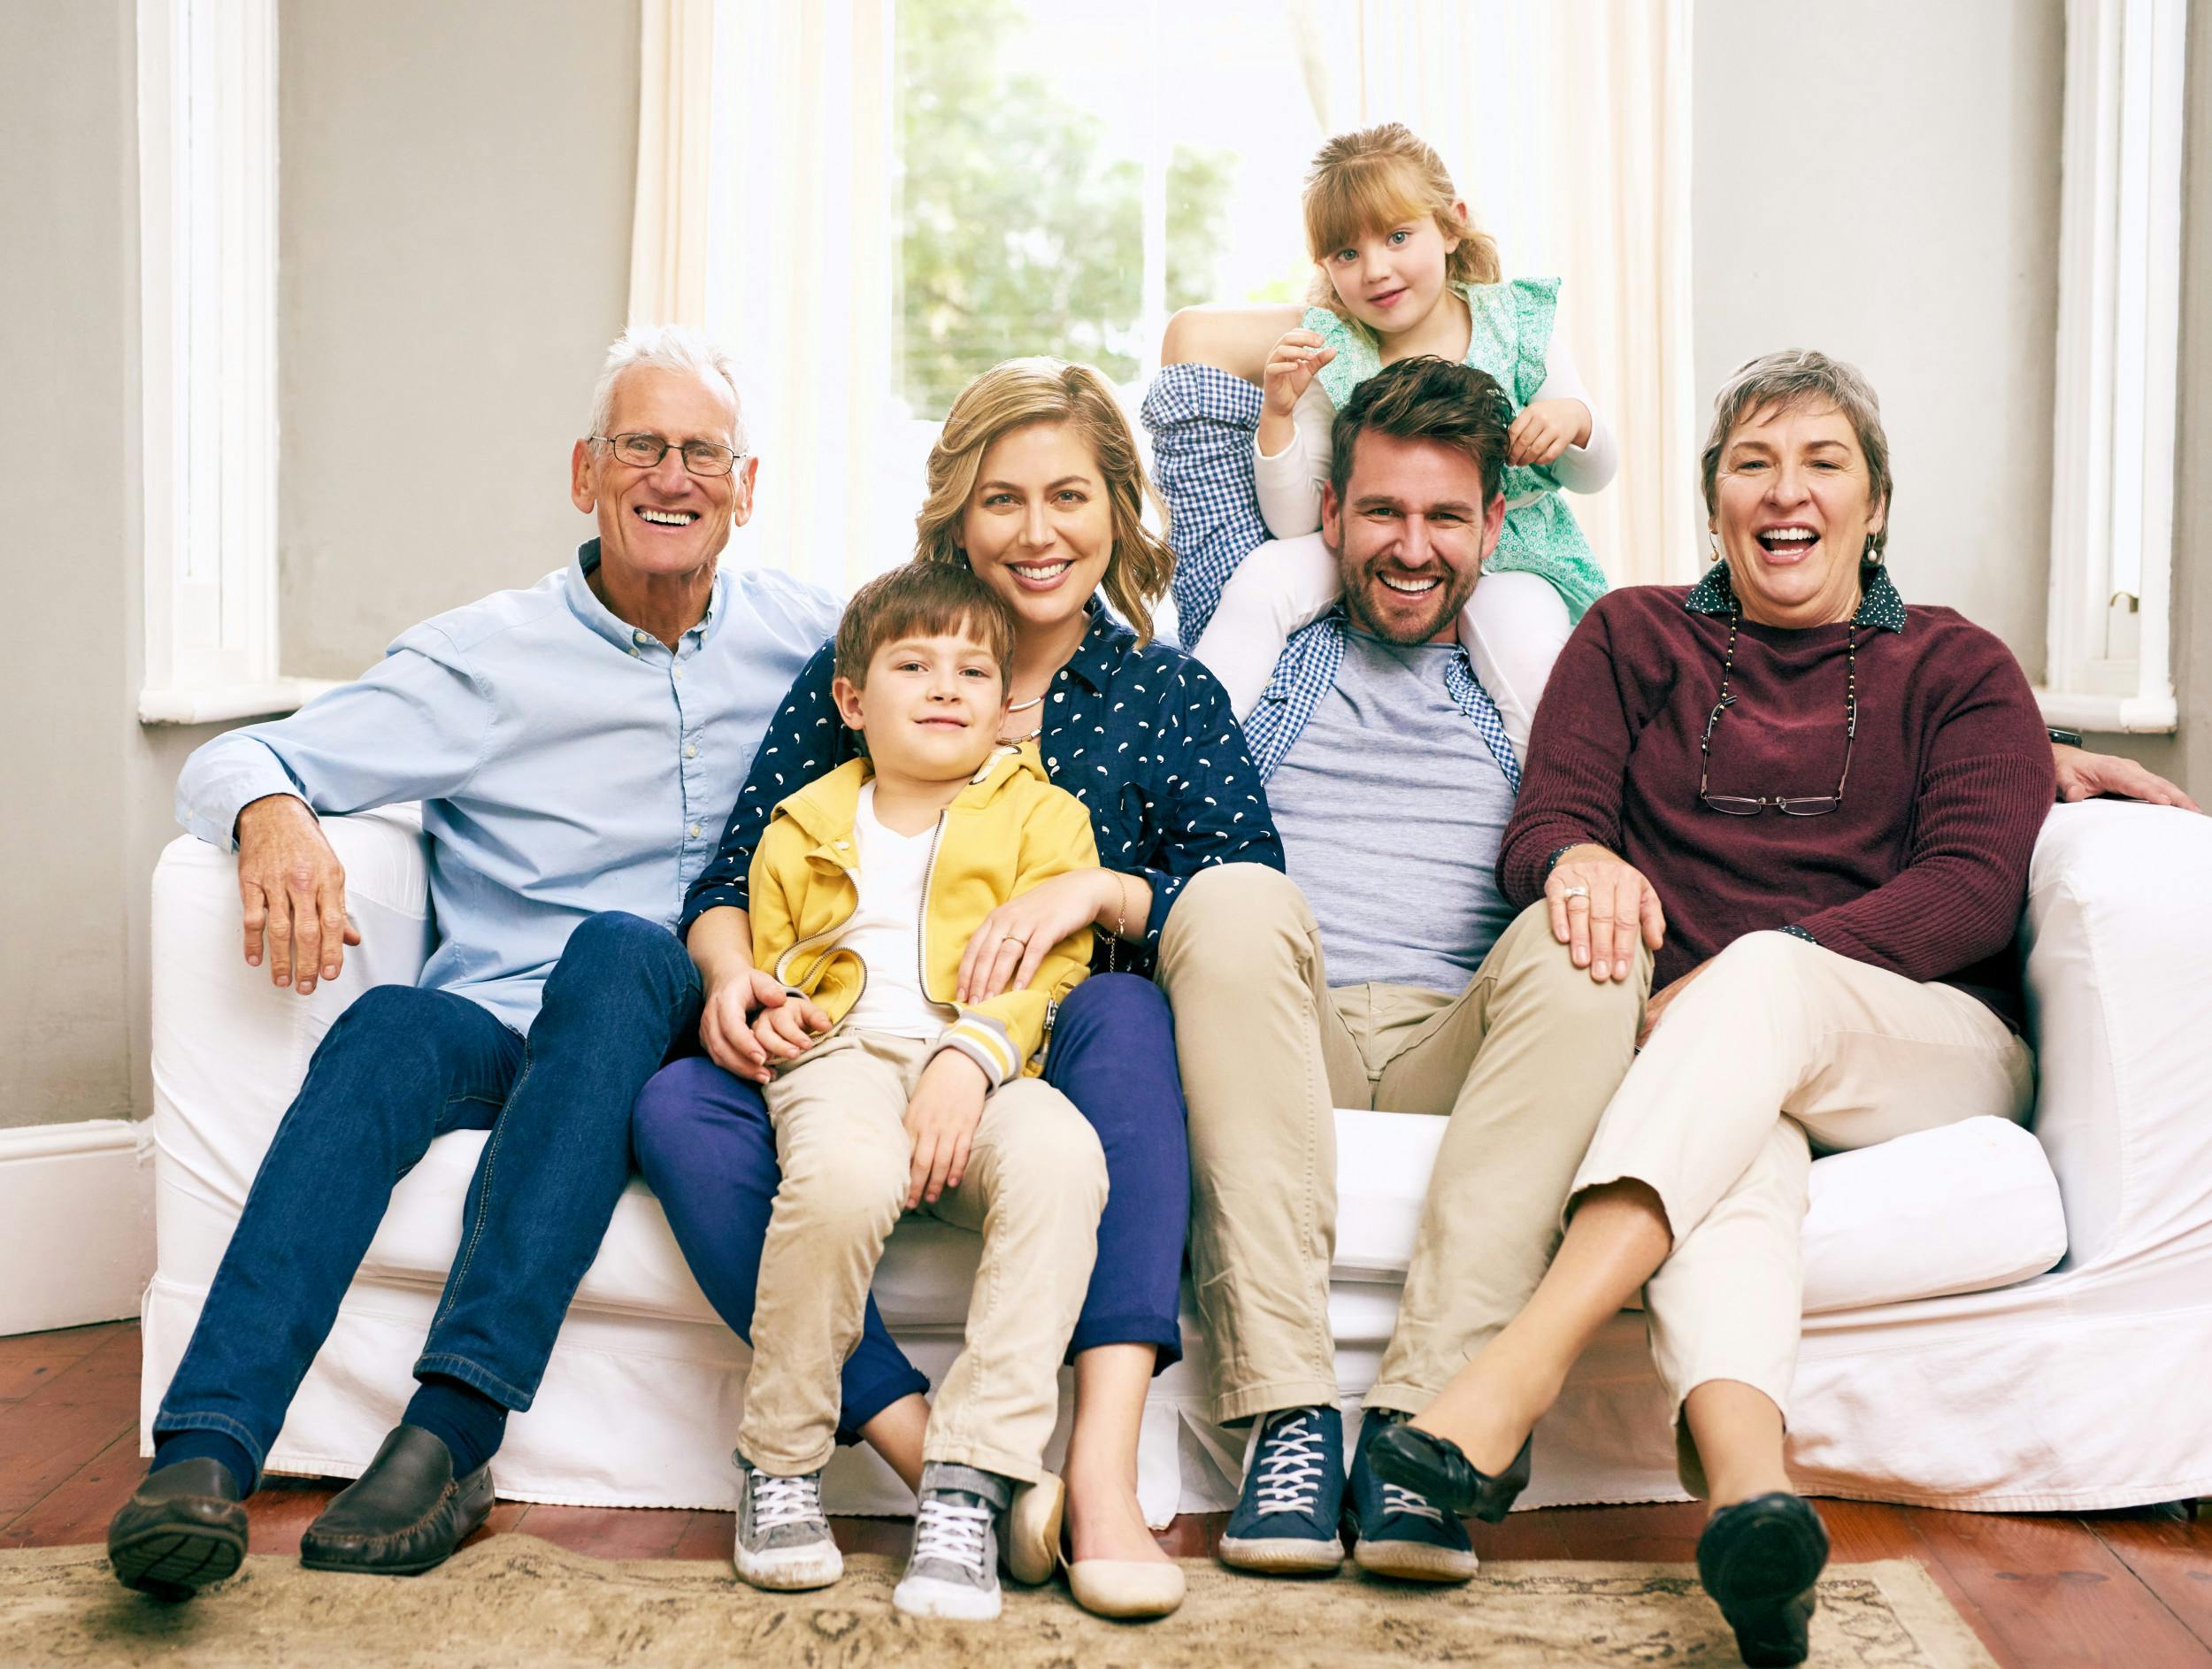 5 Key Trends In Marketing to Different Age Groups